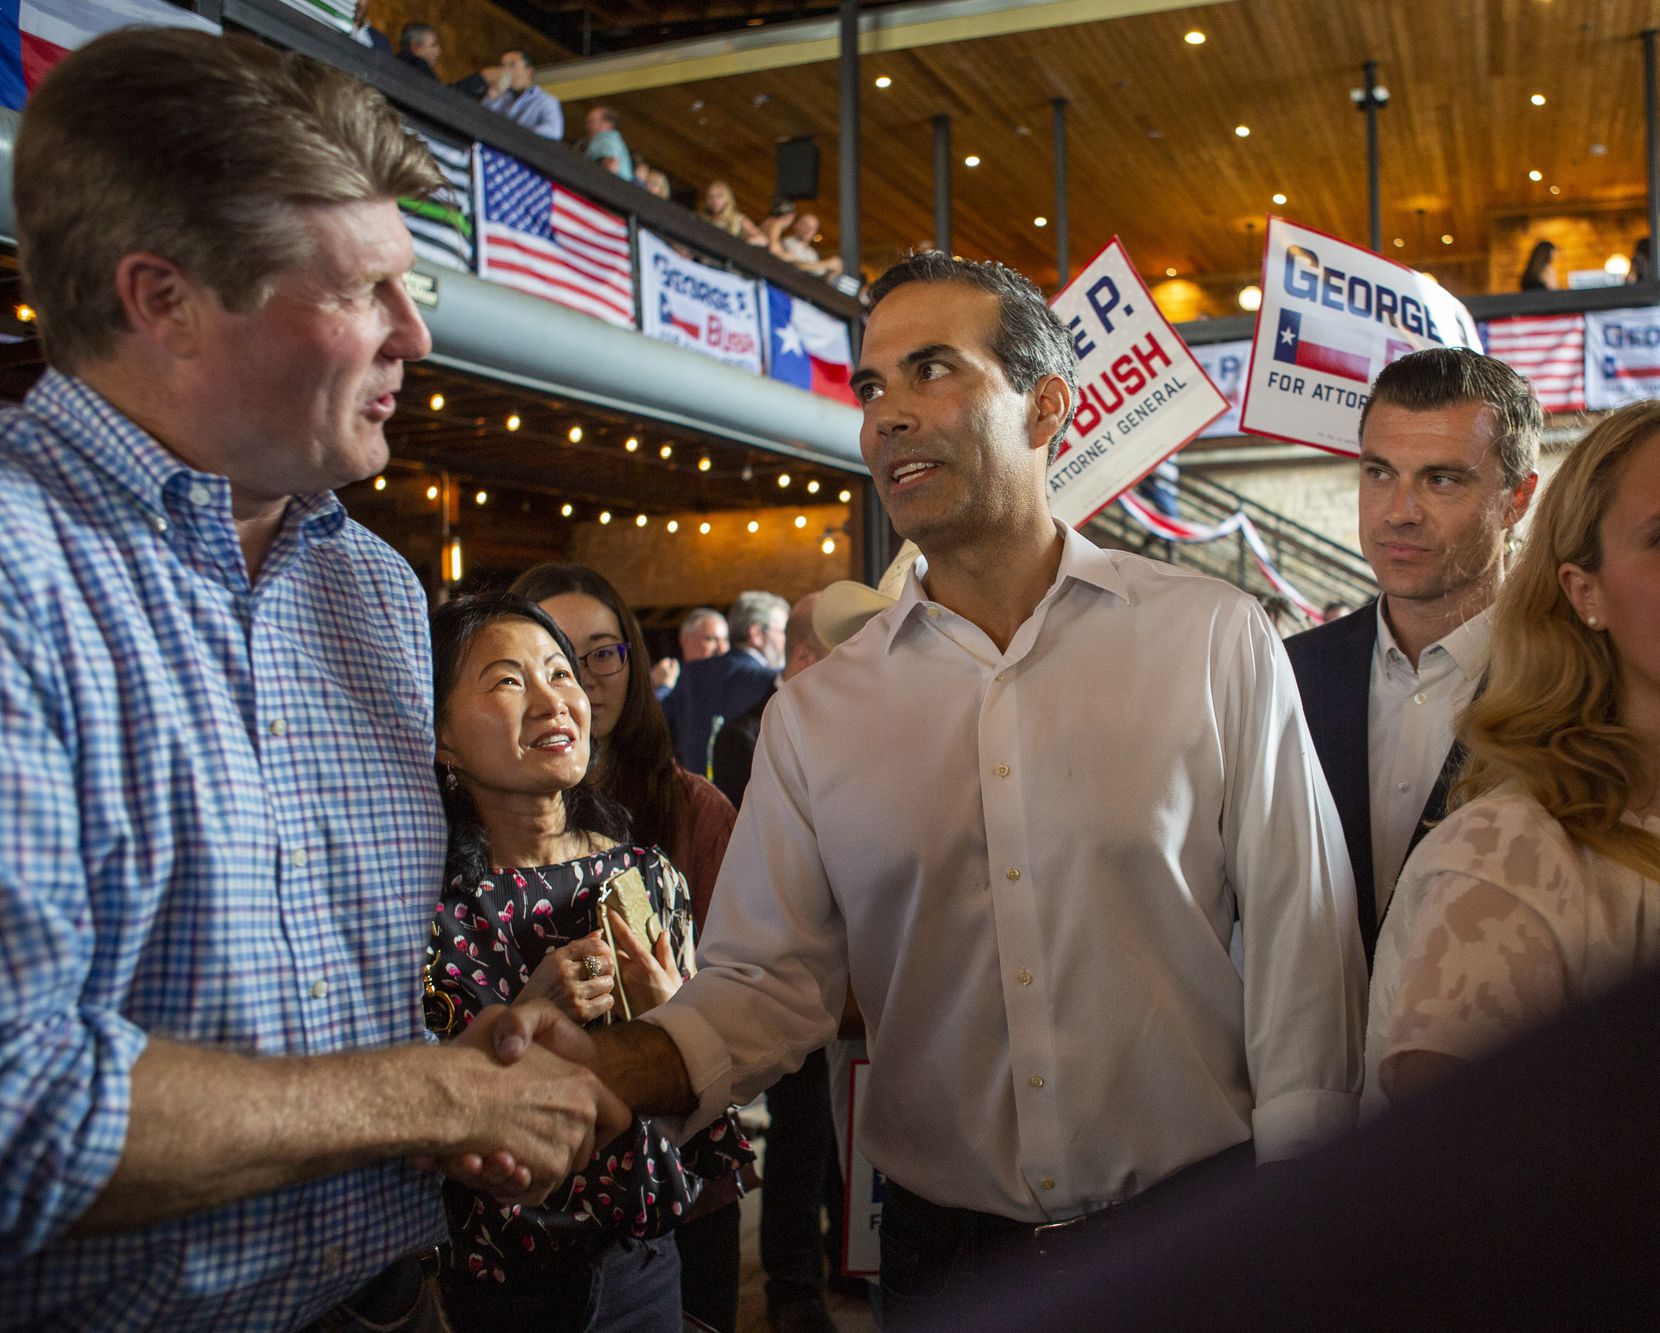 George P. Bush shakes hands with a supporter after holding a Campaign Kick-Off to announce his candidacy for Texas Attorney General at Buford's Backyard Beer Garden on June 2, 2021 in Austin, Texas.